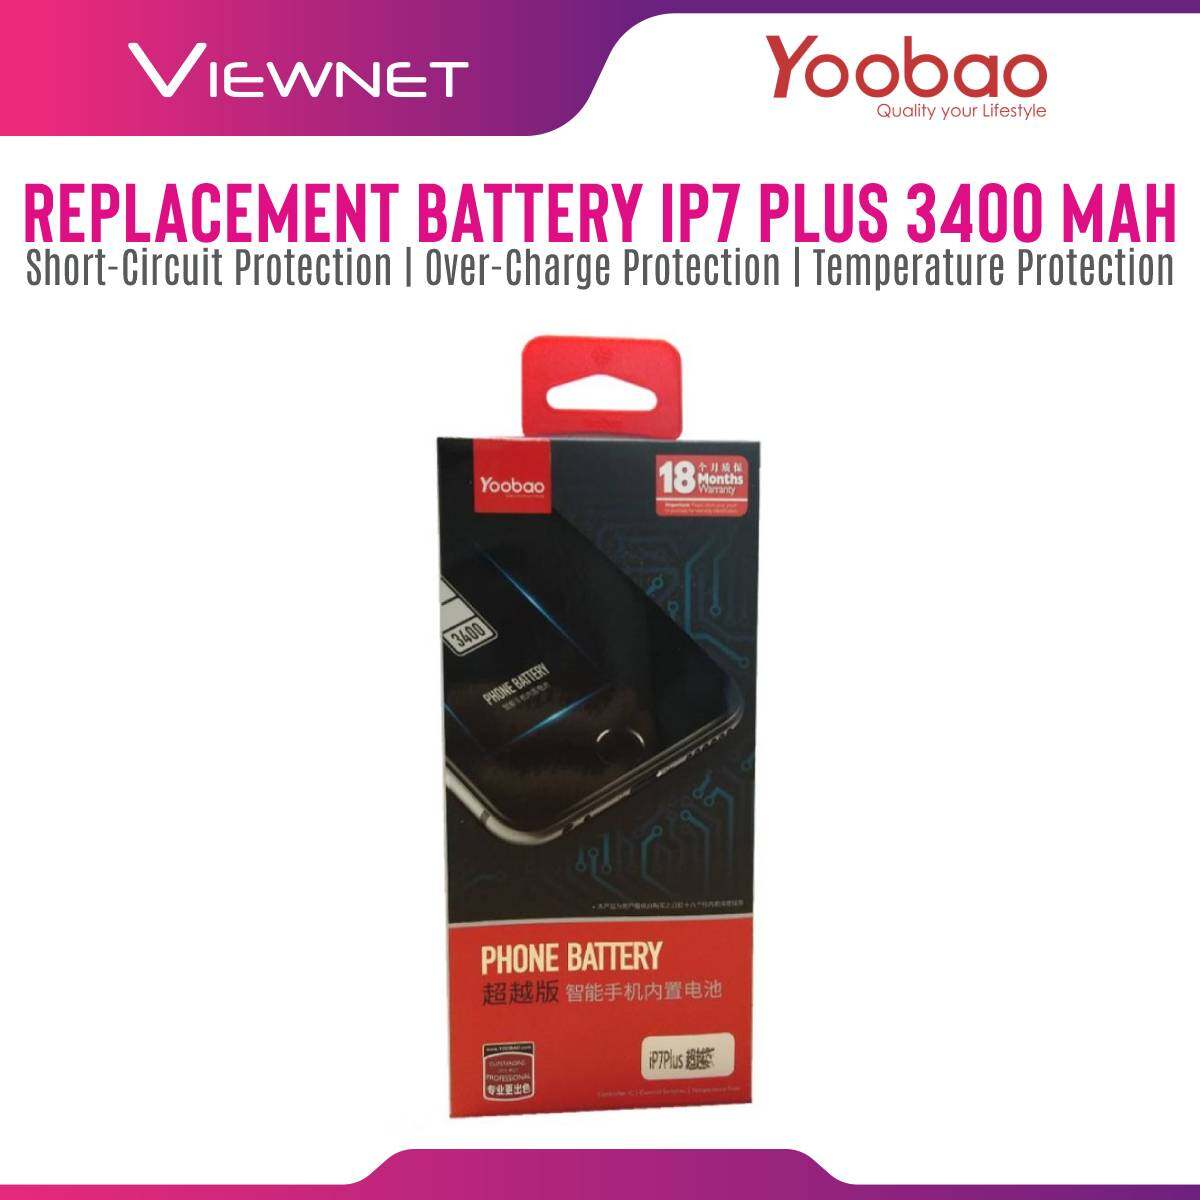 Yoobao 3400mAh Advance iPhone 7 Plus Phone Battery High Capacity with 12 Month Warranty